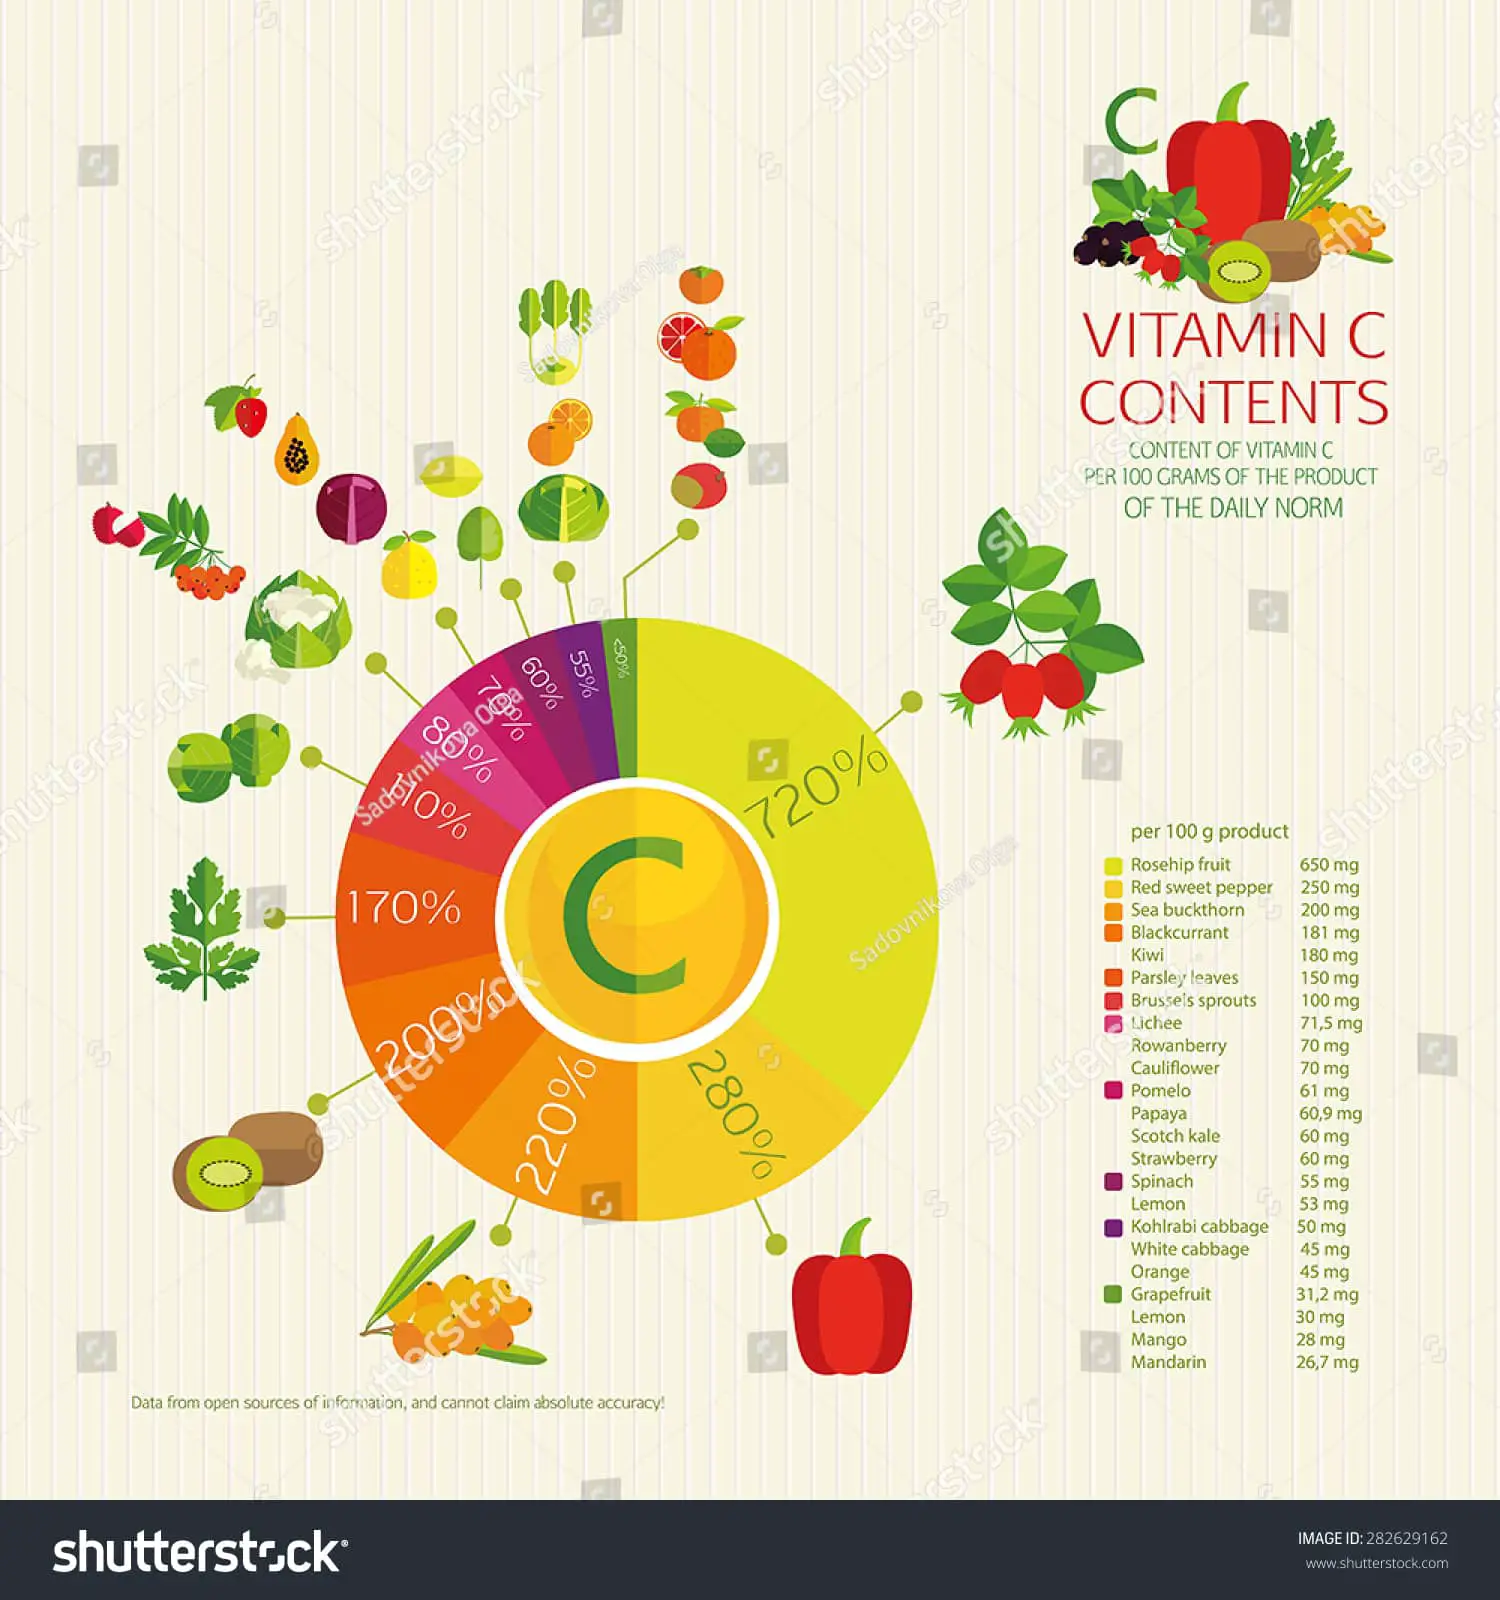 Diagram Vitamin C Content Vegetables Fruits Stock Vector (Royalty Free ...